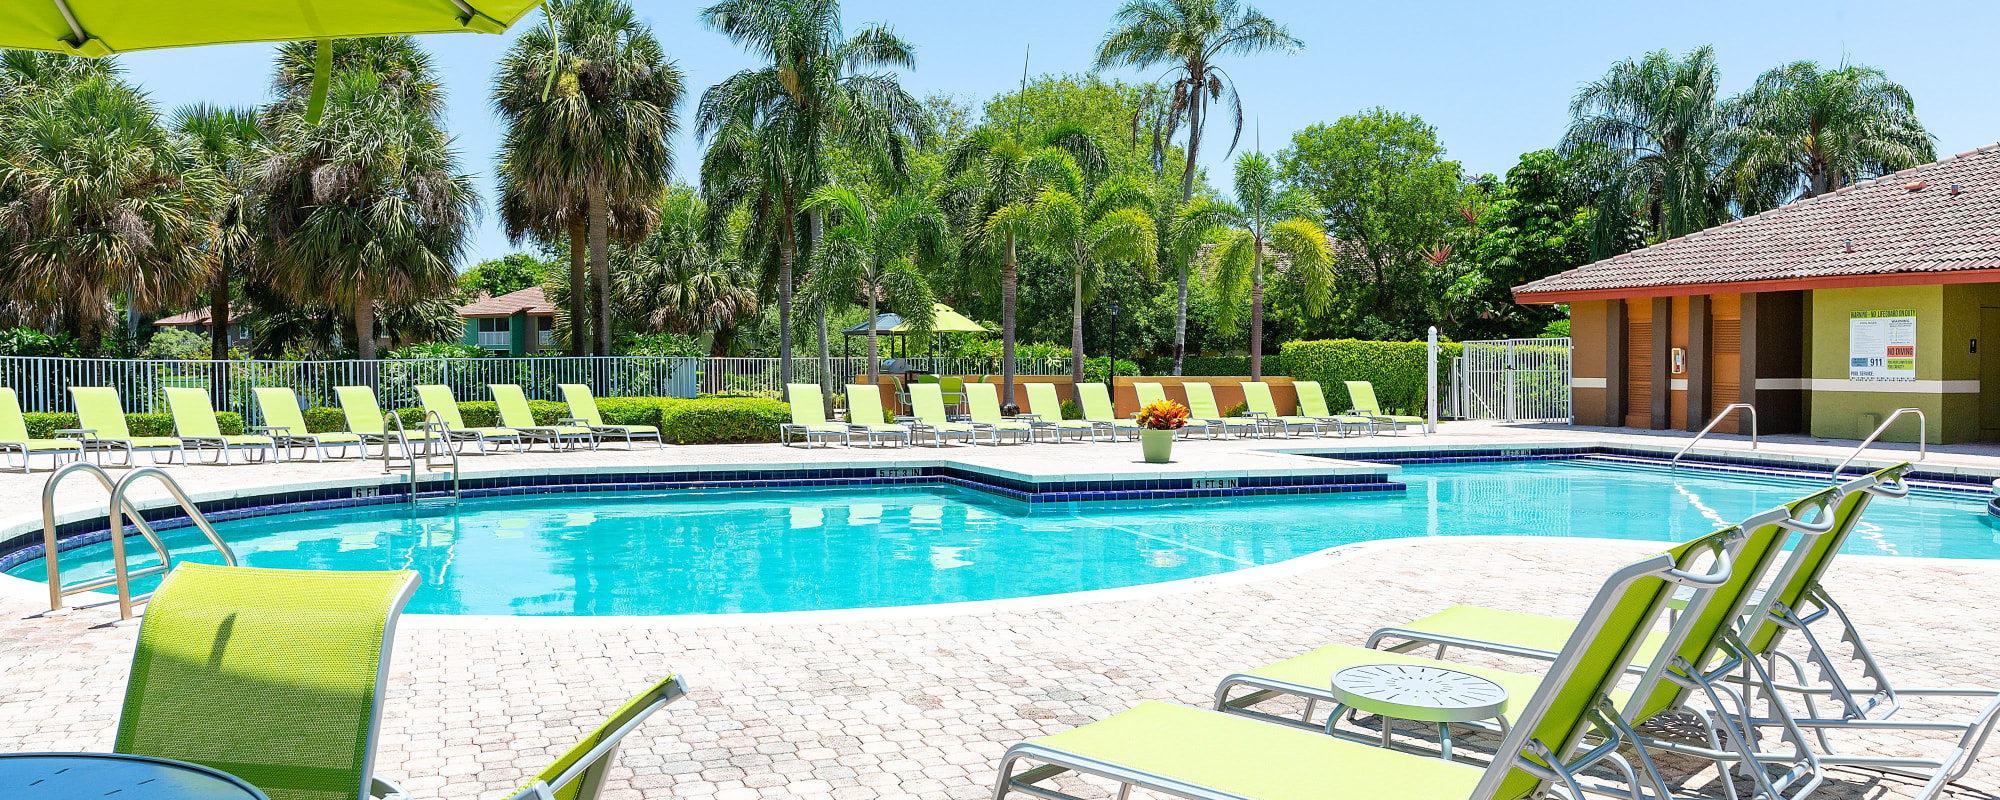 Contact us at Whalers Cove Apartments in Boynton Beach, Florida